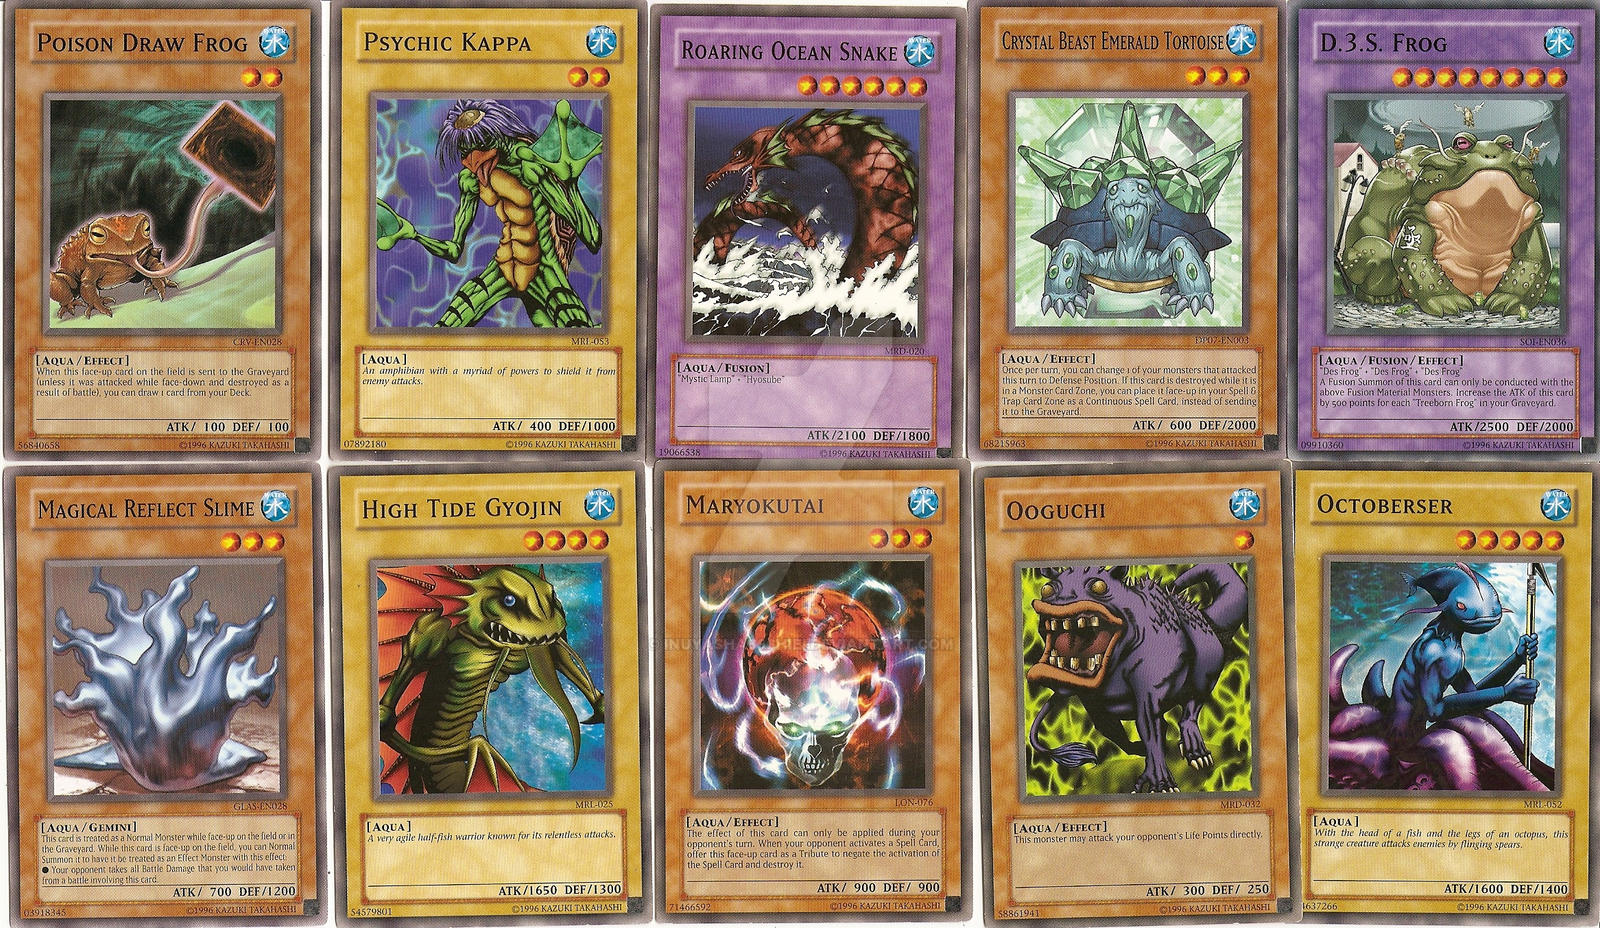 Yugioh Cards 15 By Inuyasha666hiei On DeviantArt